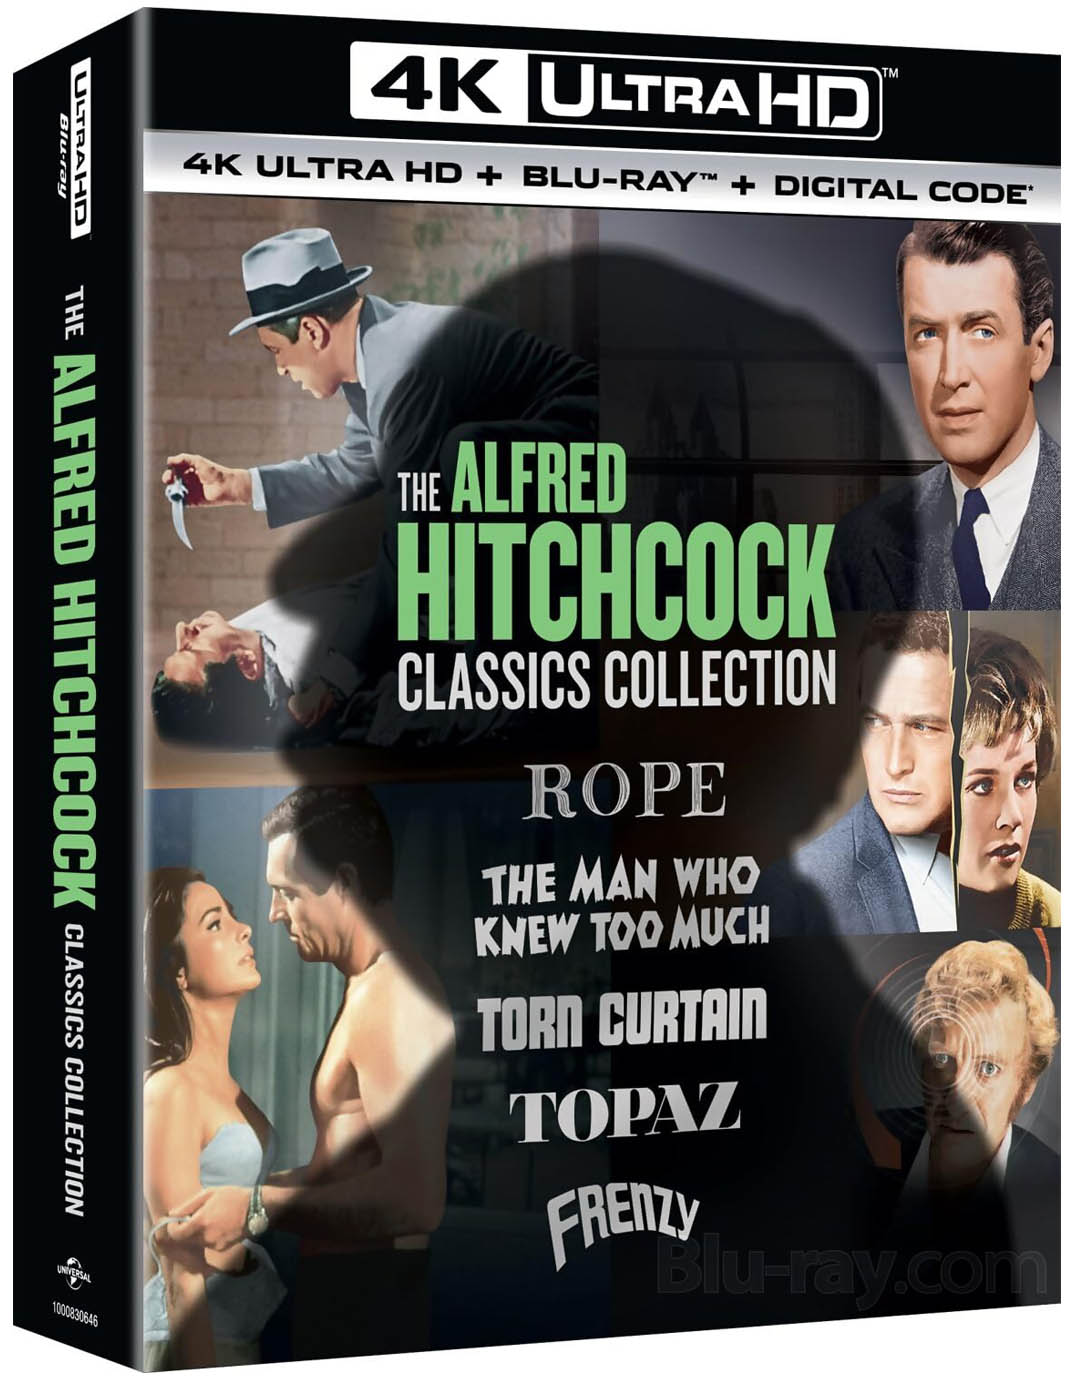 The Alfred Hitchcock Classics Collection Vol. 3 Buy on Amazon